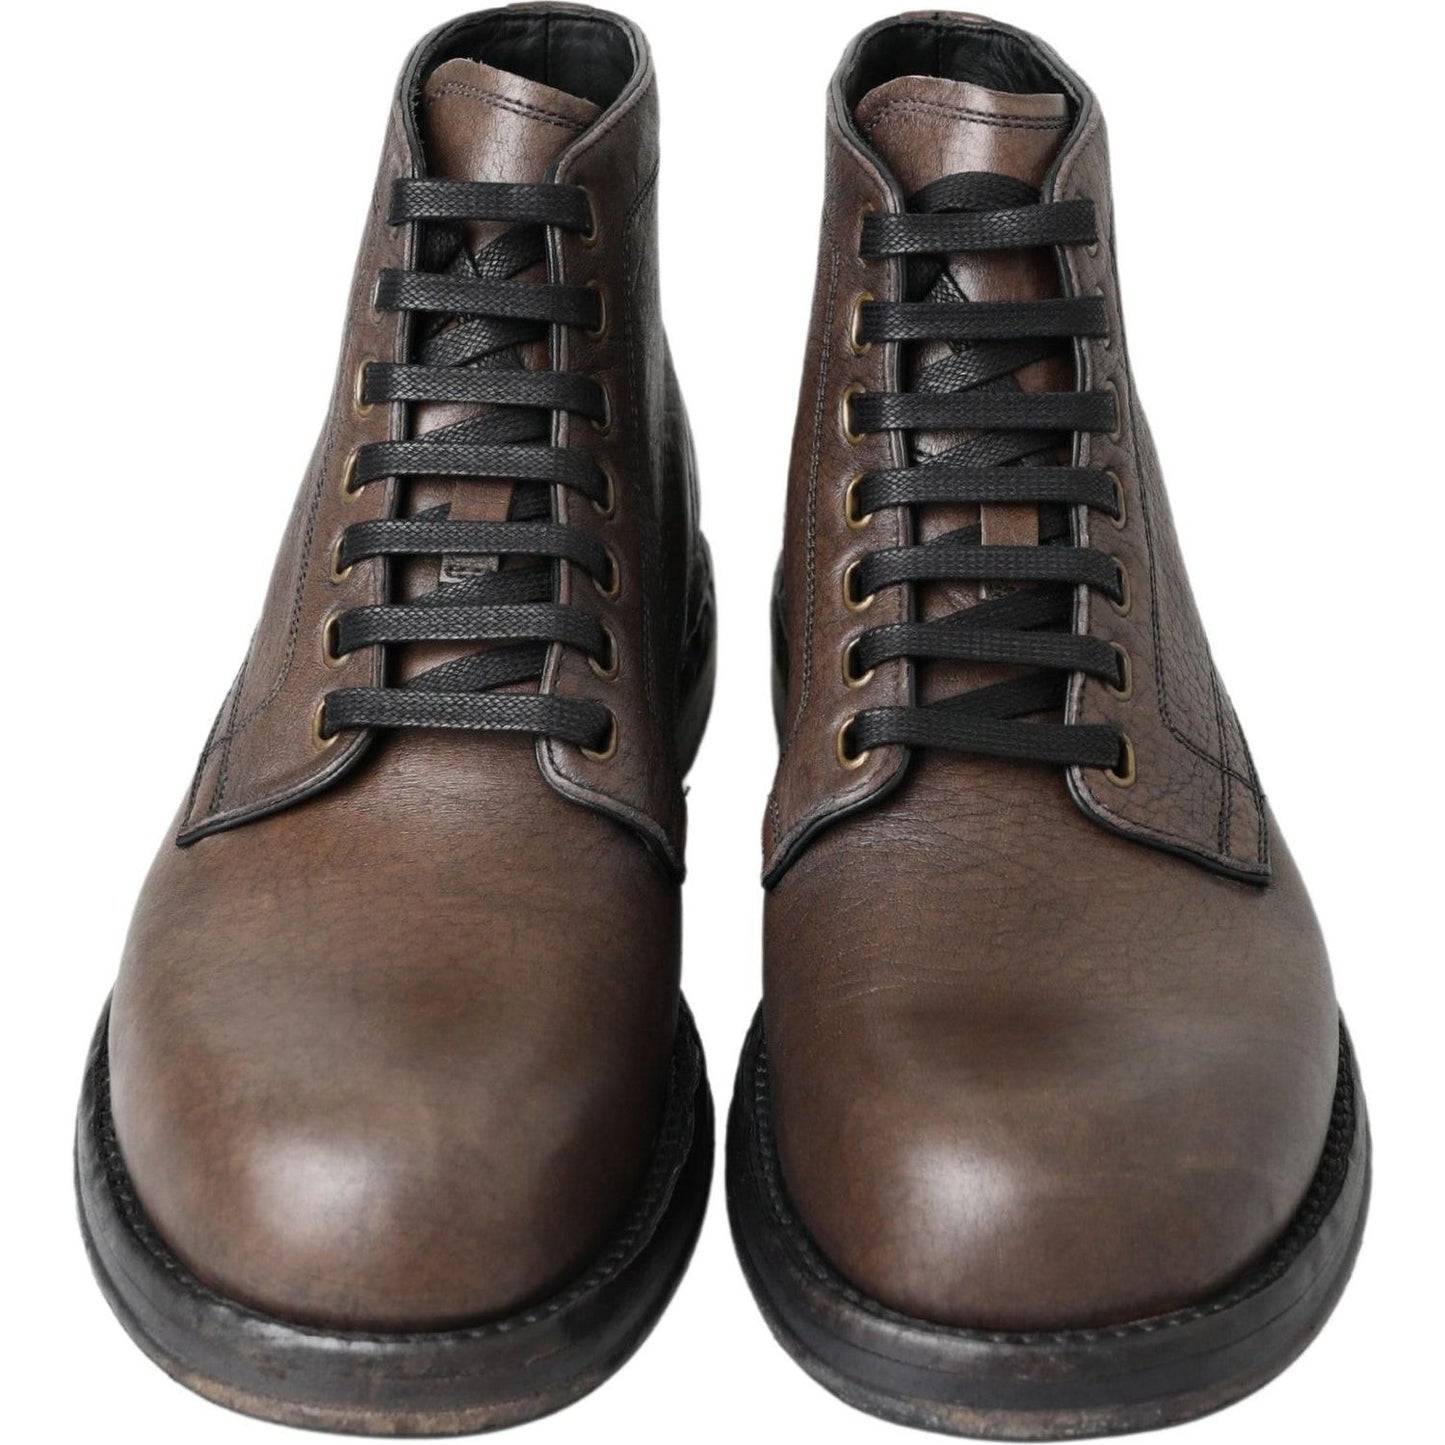 Dolce & Gabbana Elegant Horse Leather Lace-Up Boots brown-horse-leather-perugino-shoes